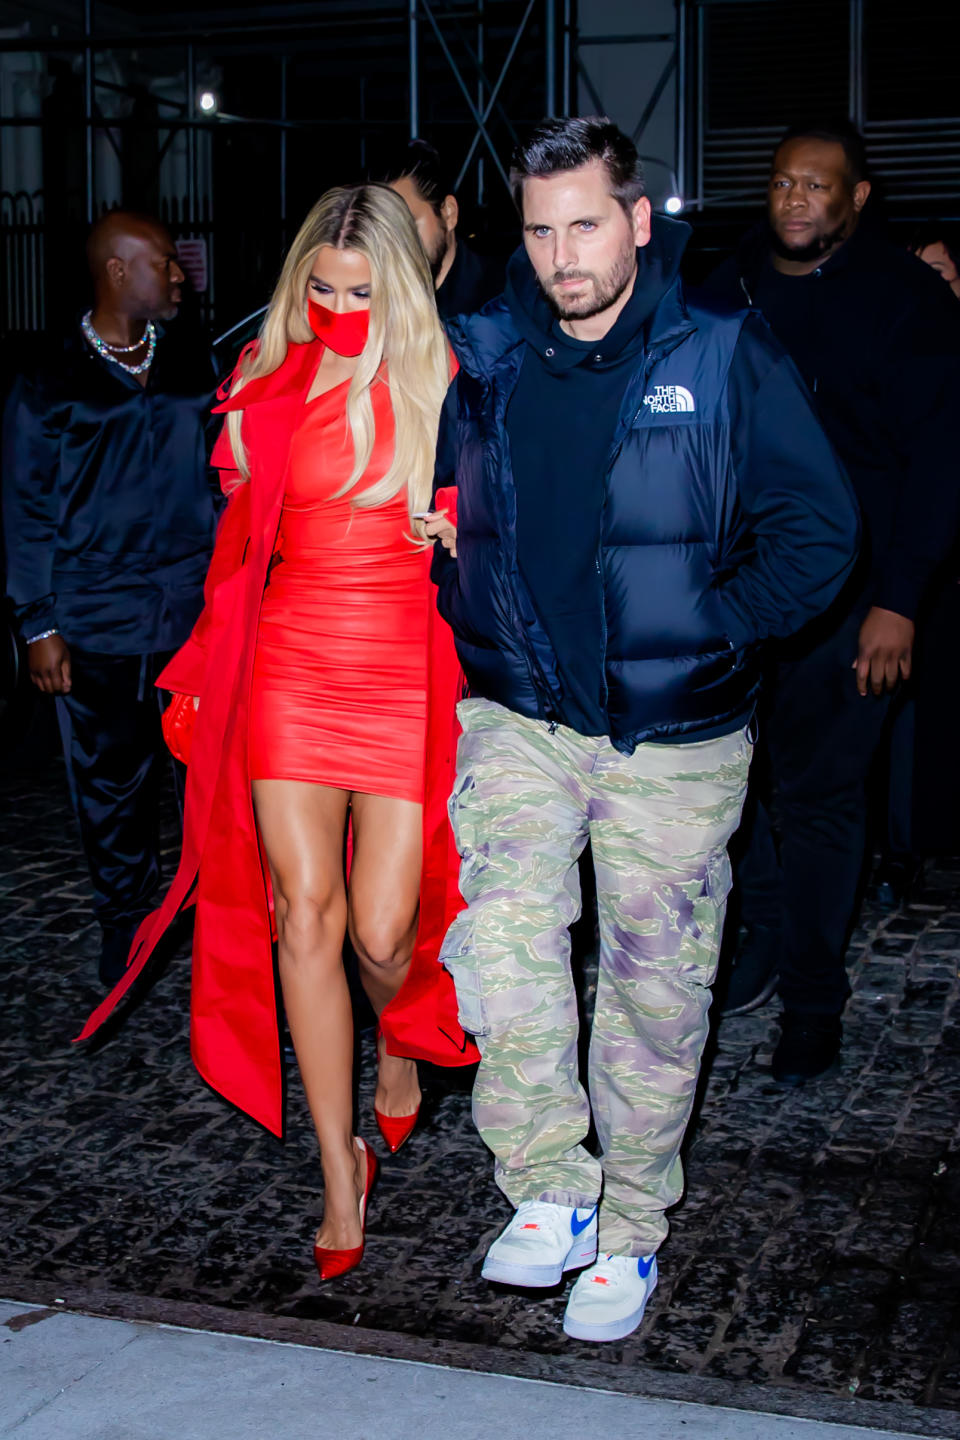 Khloe Kardashian attends the “Saturday Night Live” afterparty with Scott Disick at Zero Bond in New York City. - Credit: @TheHapaBlonde / SplashNews.com